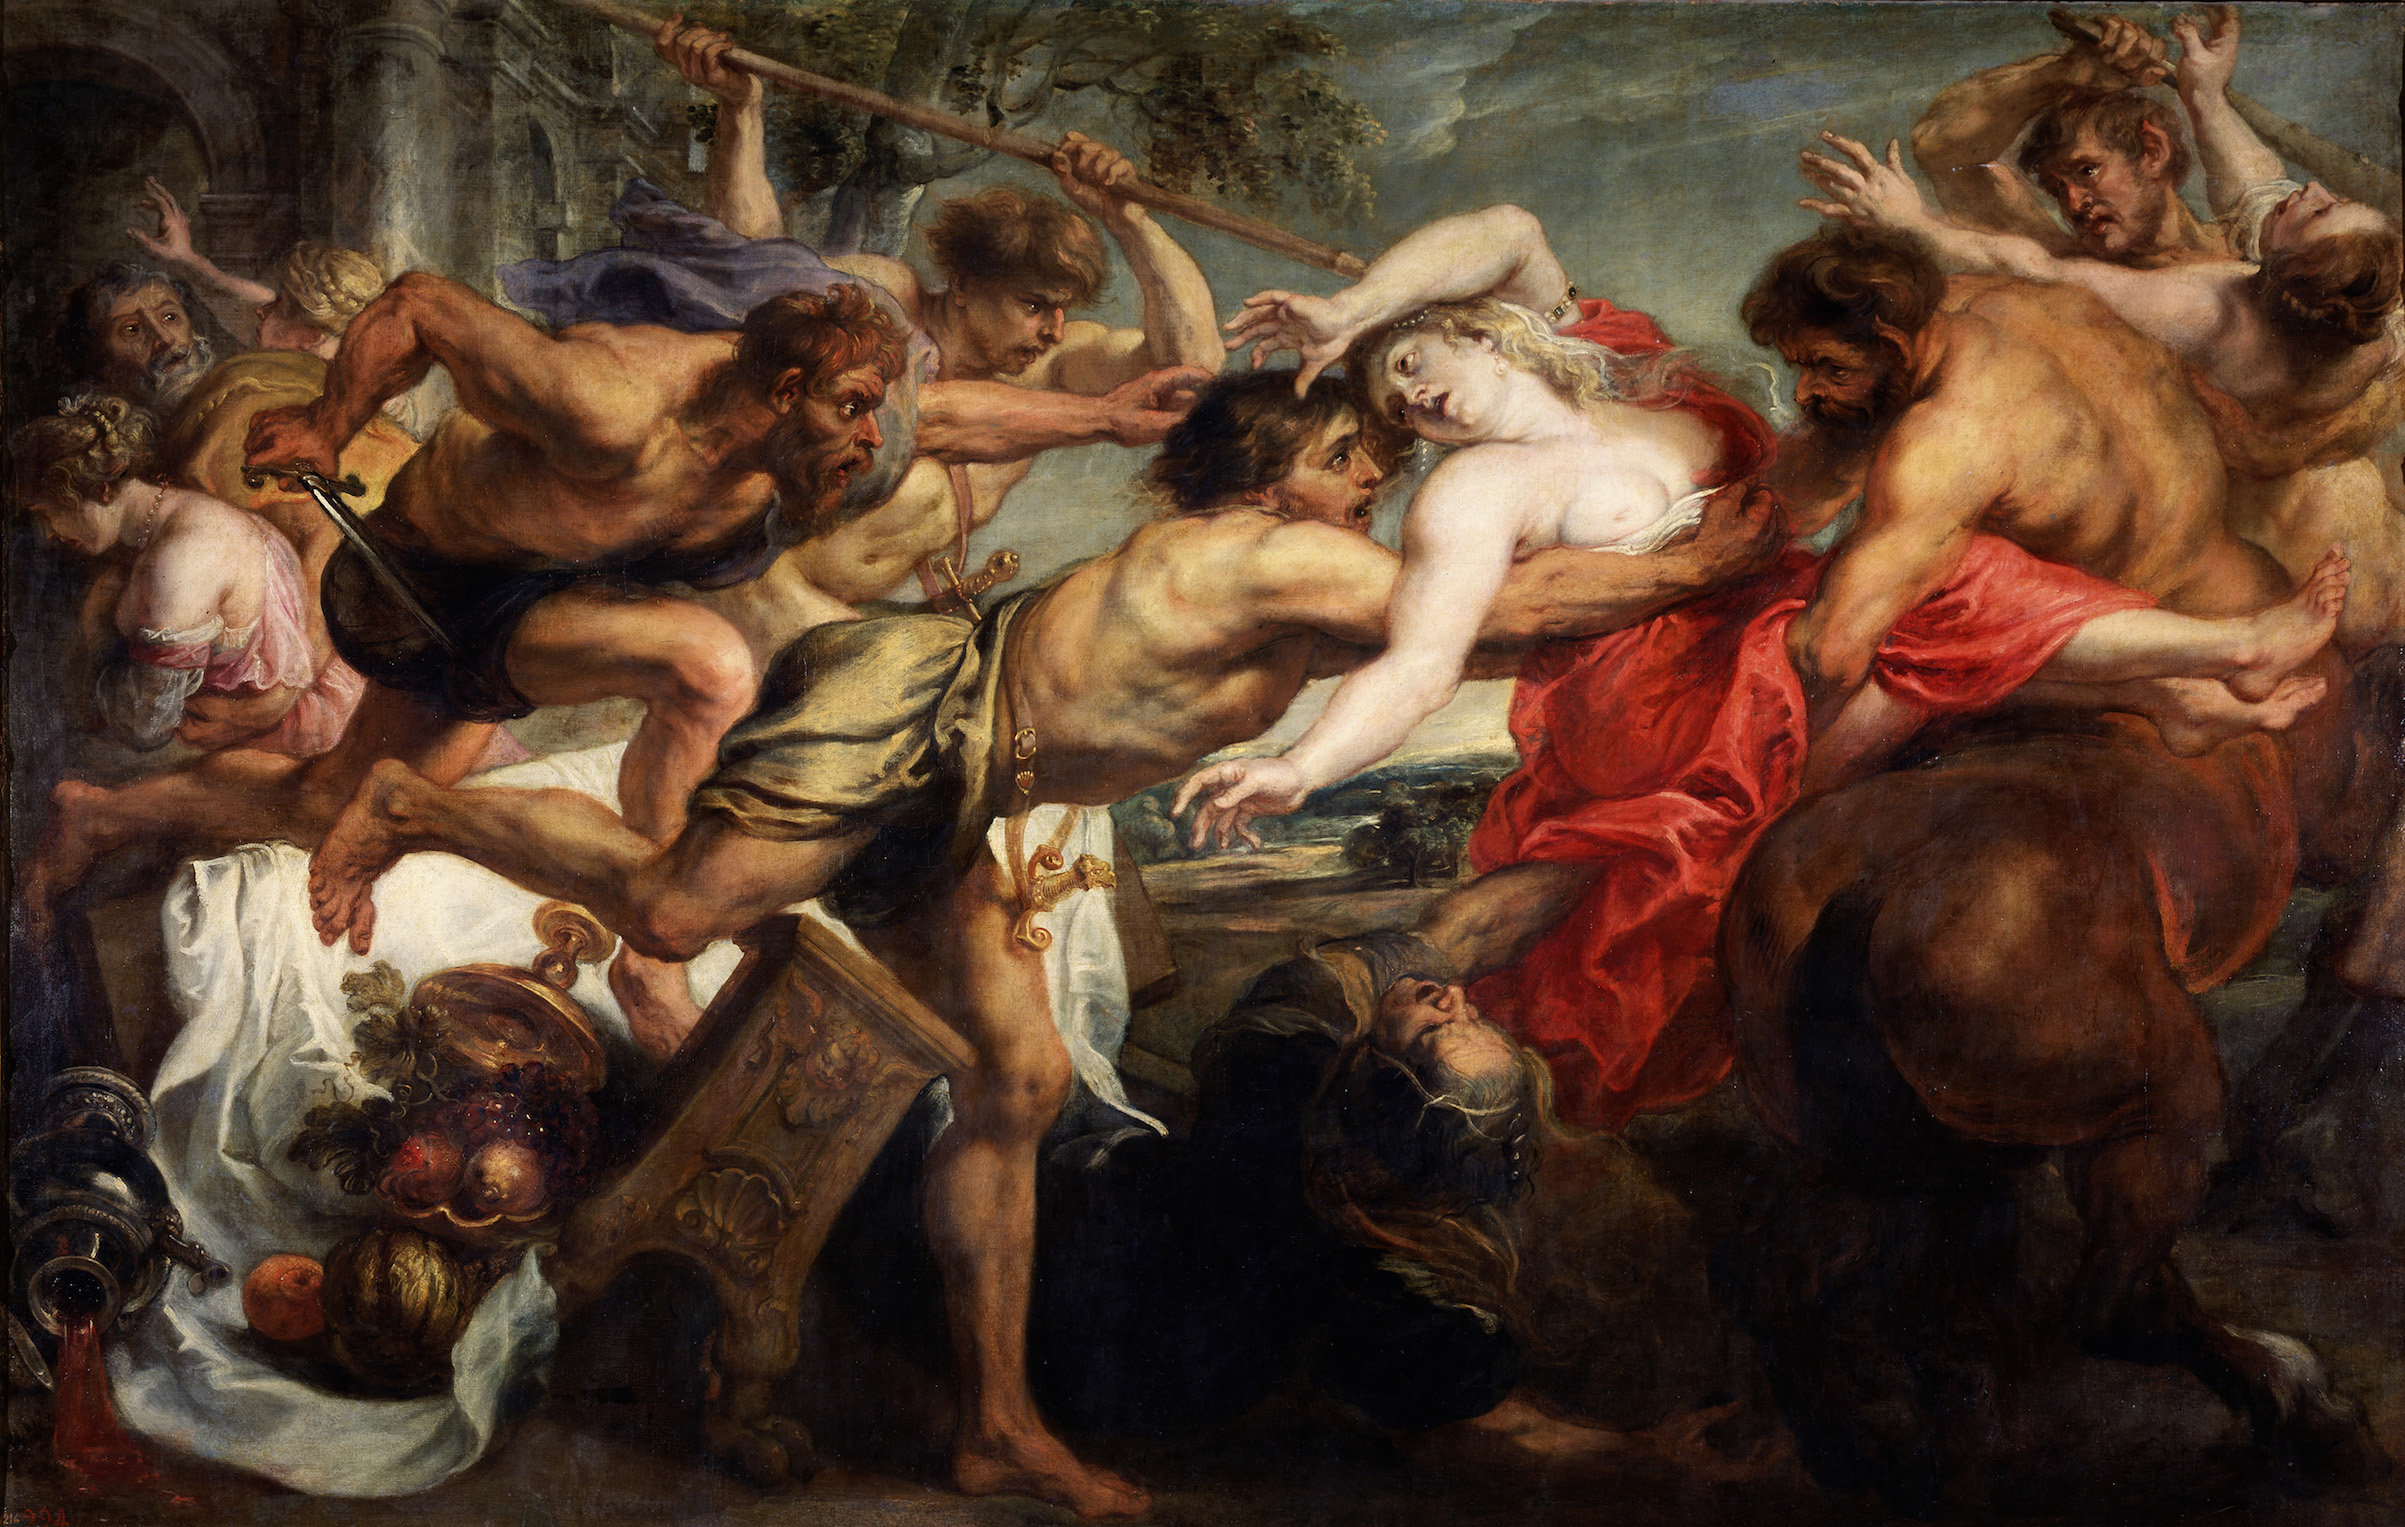 The Abduction of Hippodamia, or Lapiths and Centaurs, 1636-1638. Found in the collection of the Museo del Prado, Madrid.